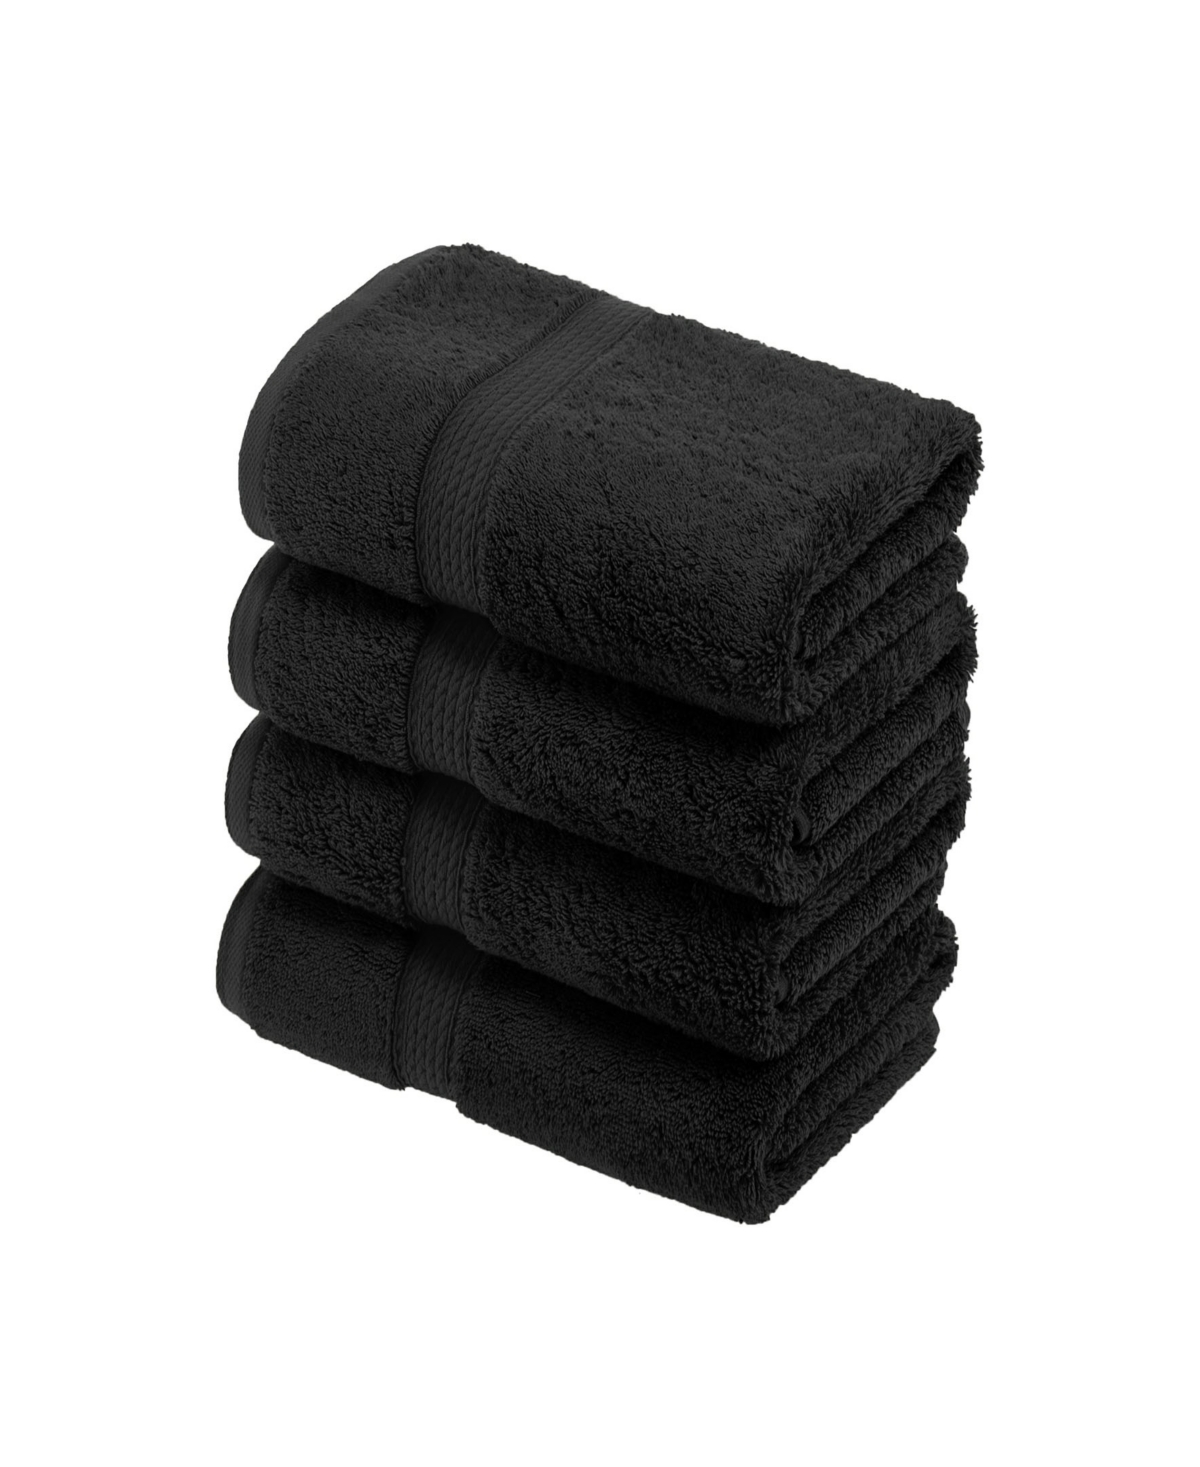 Superior Highly Absorbent Cotton 4-pc. Hand Towel Set Black